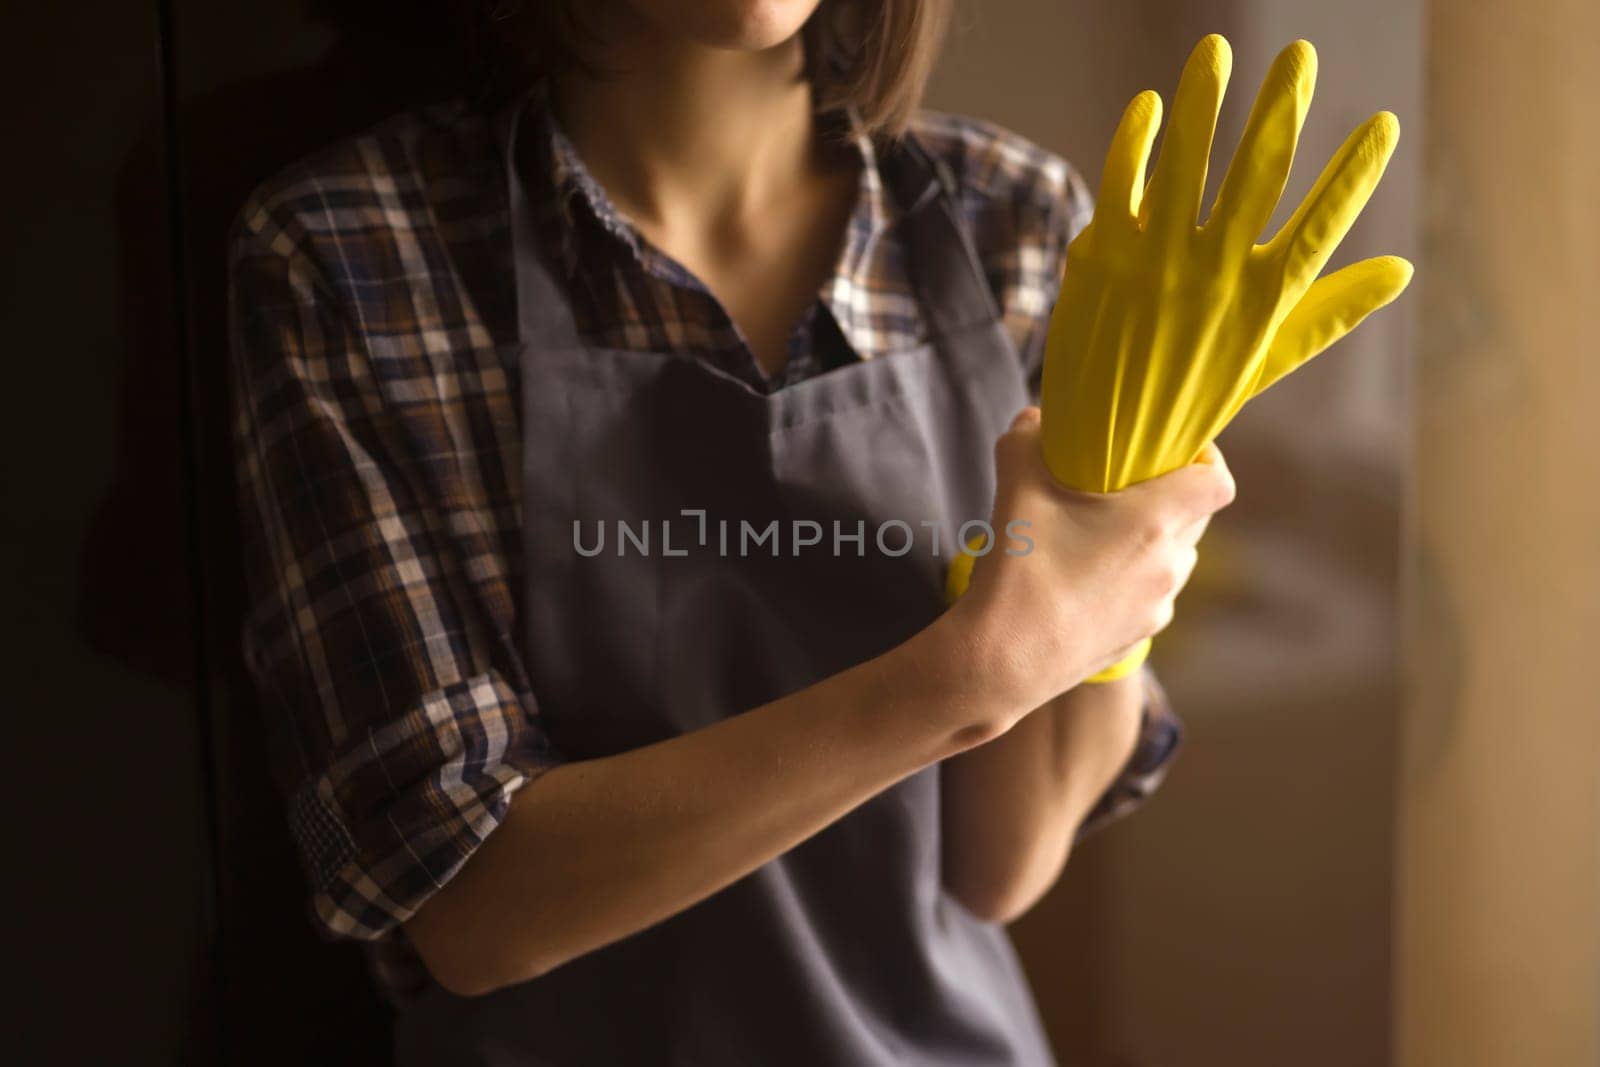 A woman in yellow rubber gloves does housework by africapink